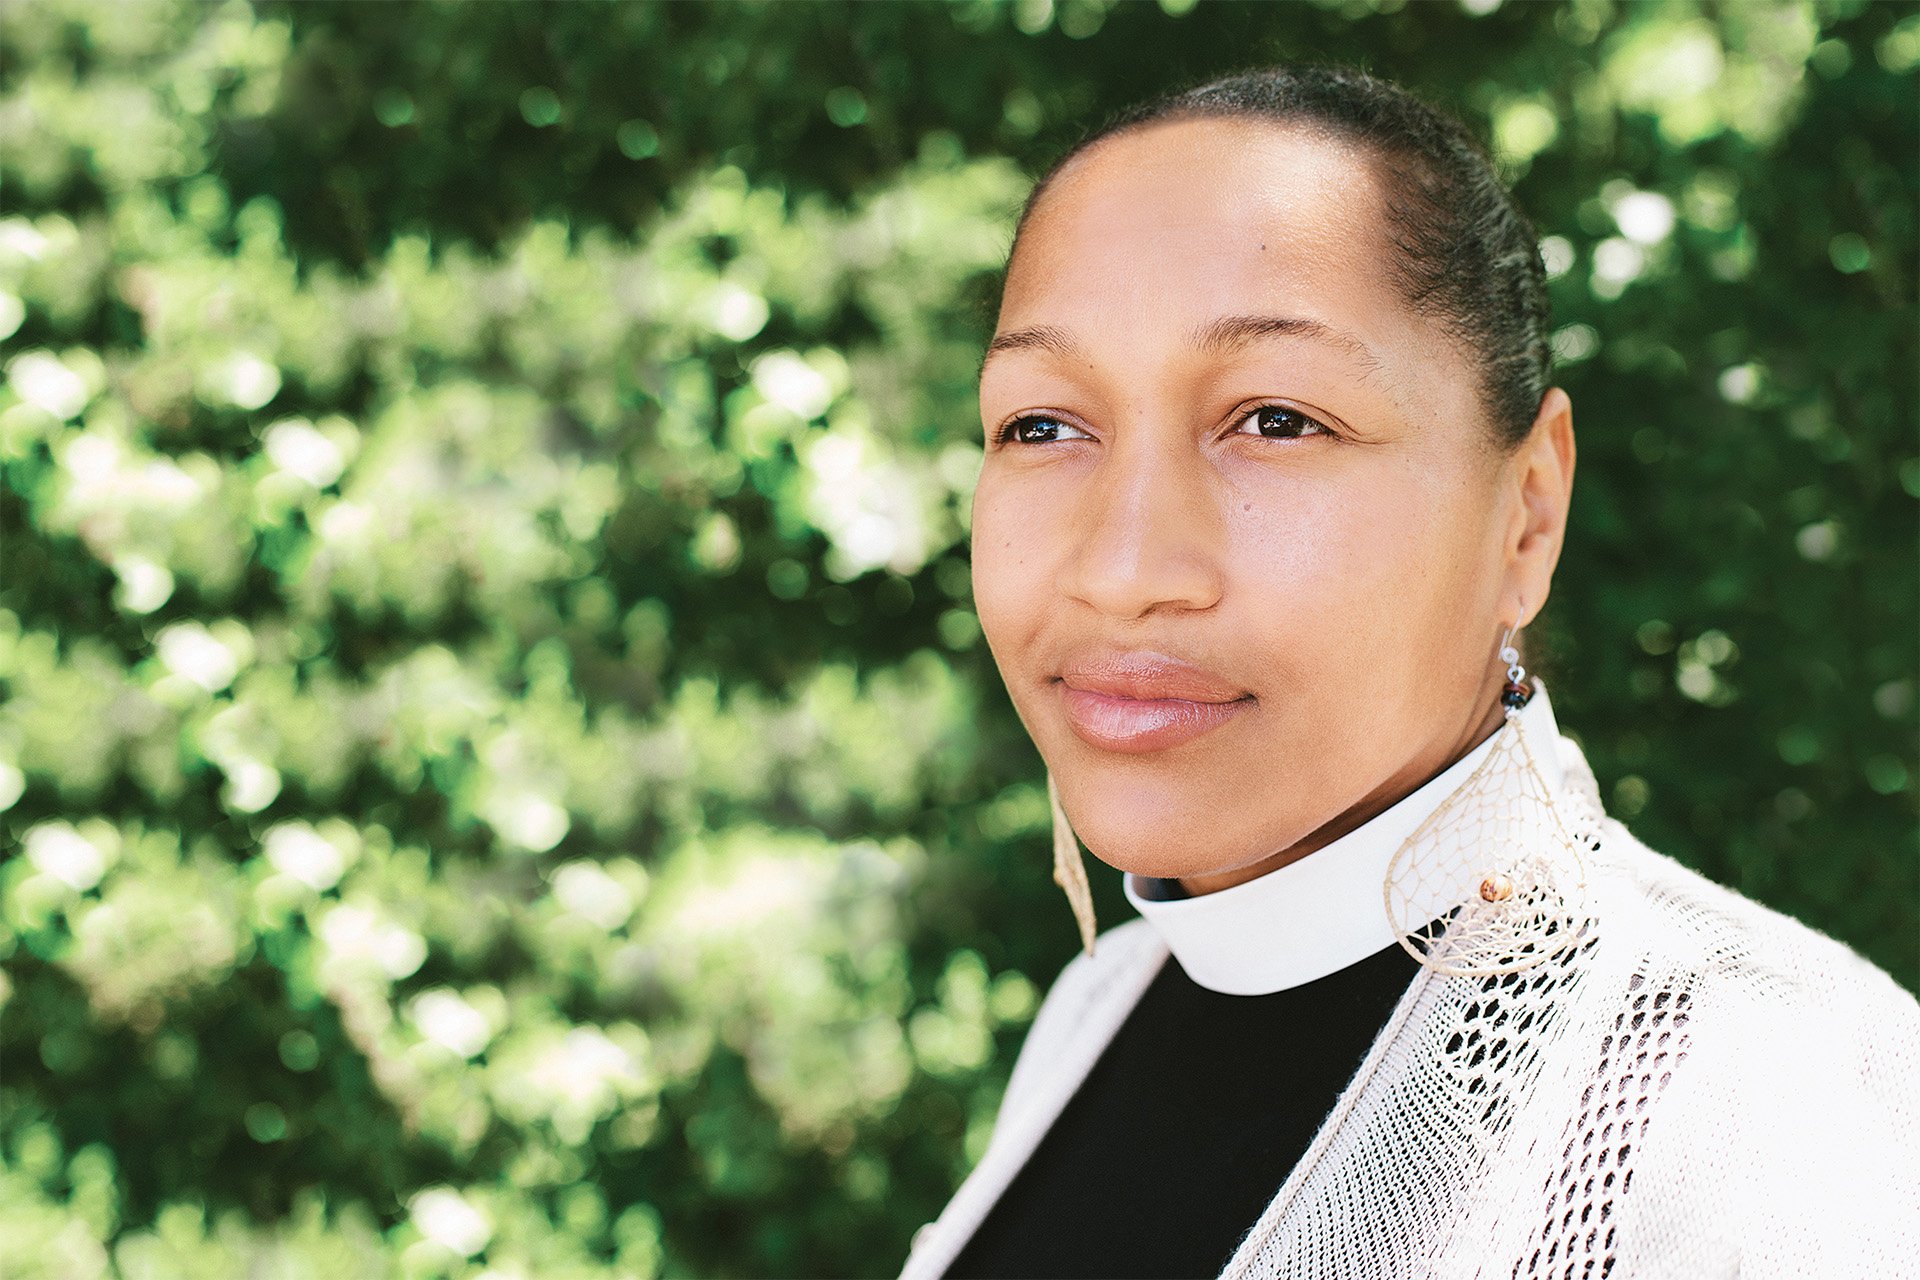 A portrait of Rev. Mariama White-Hammond standing in front of a green, leafy background